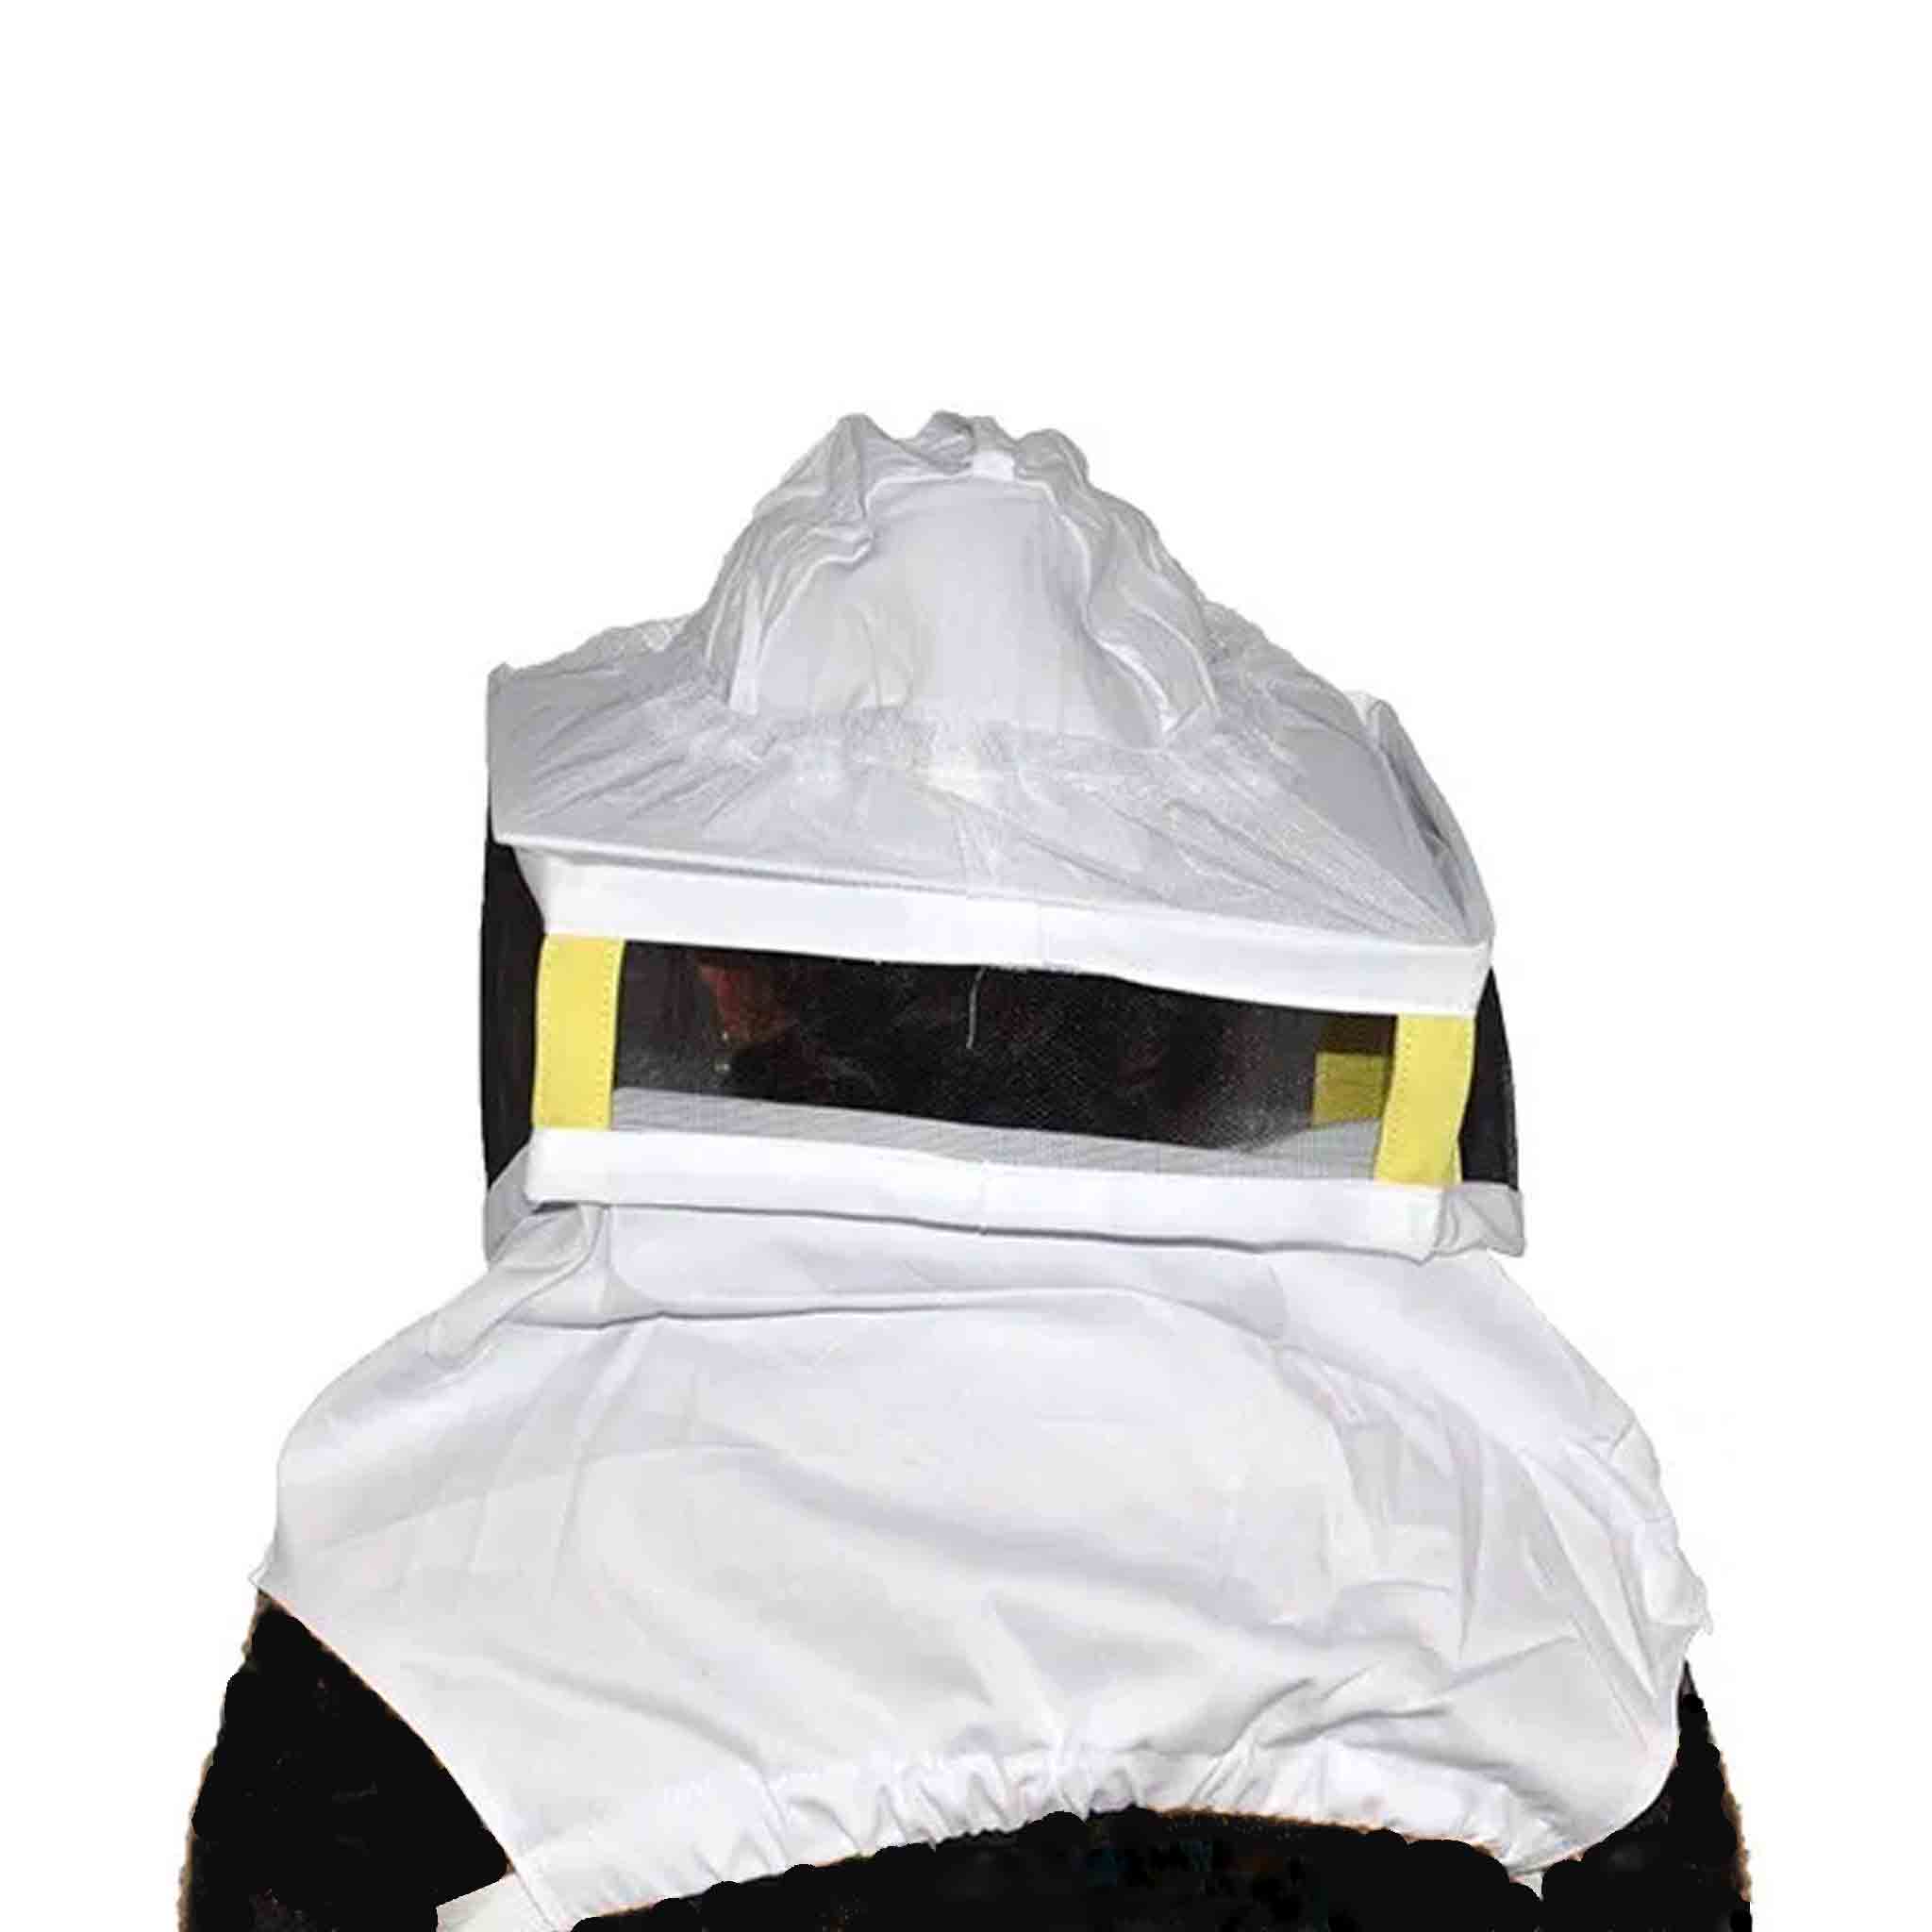 Beekeeping Protective Square Hat and Veil - Clothing collection by Buzzbee Beekeeping Supplies